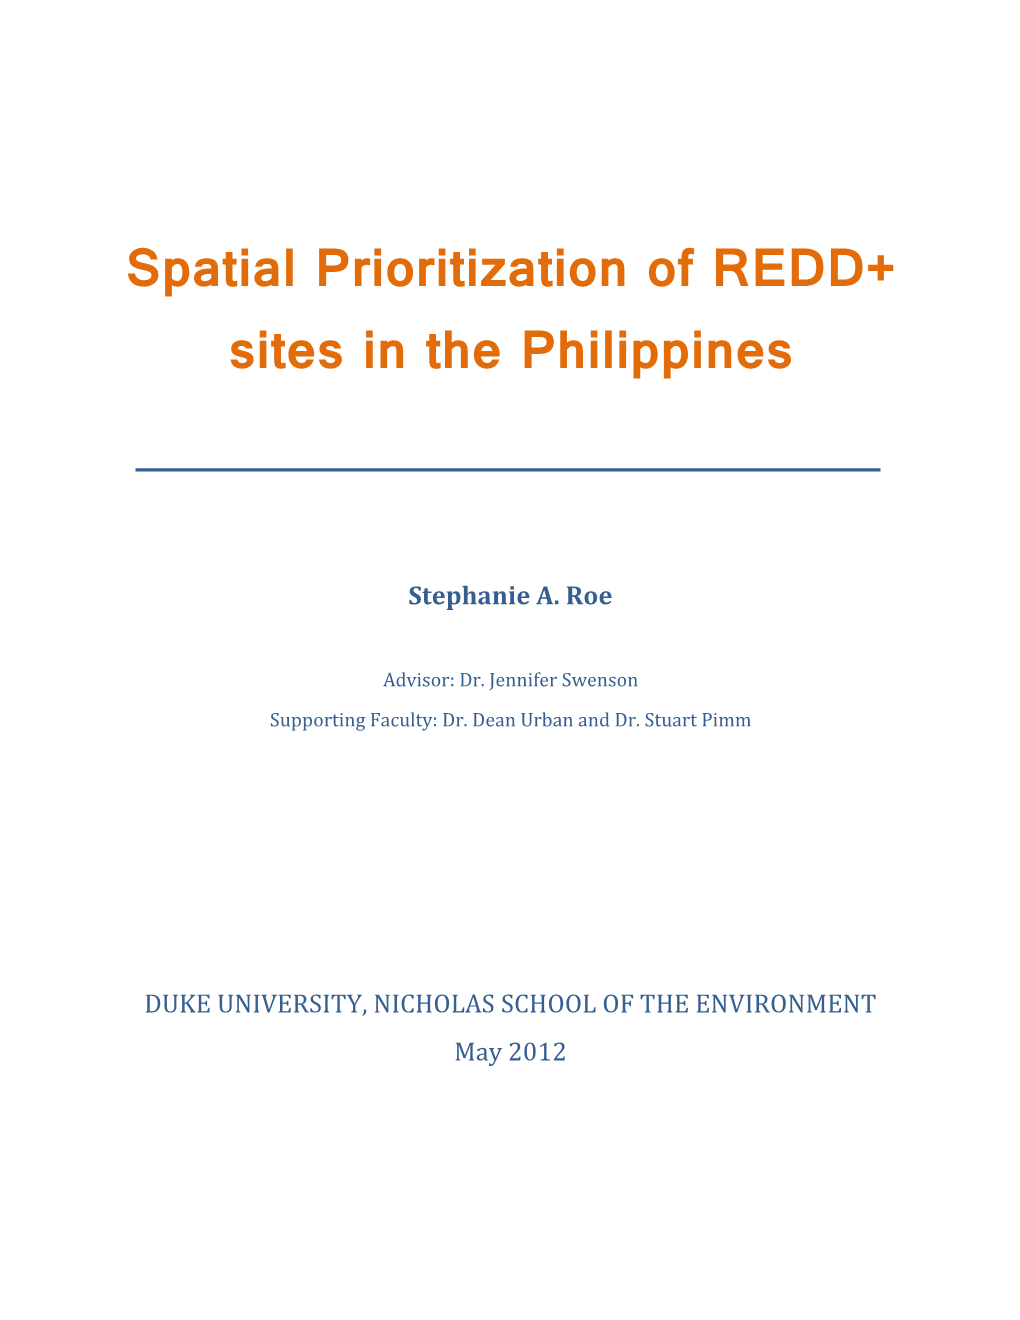 Spatial Prioritization of REDD+ Sites in the Philippines